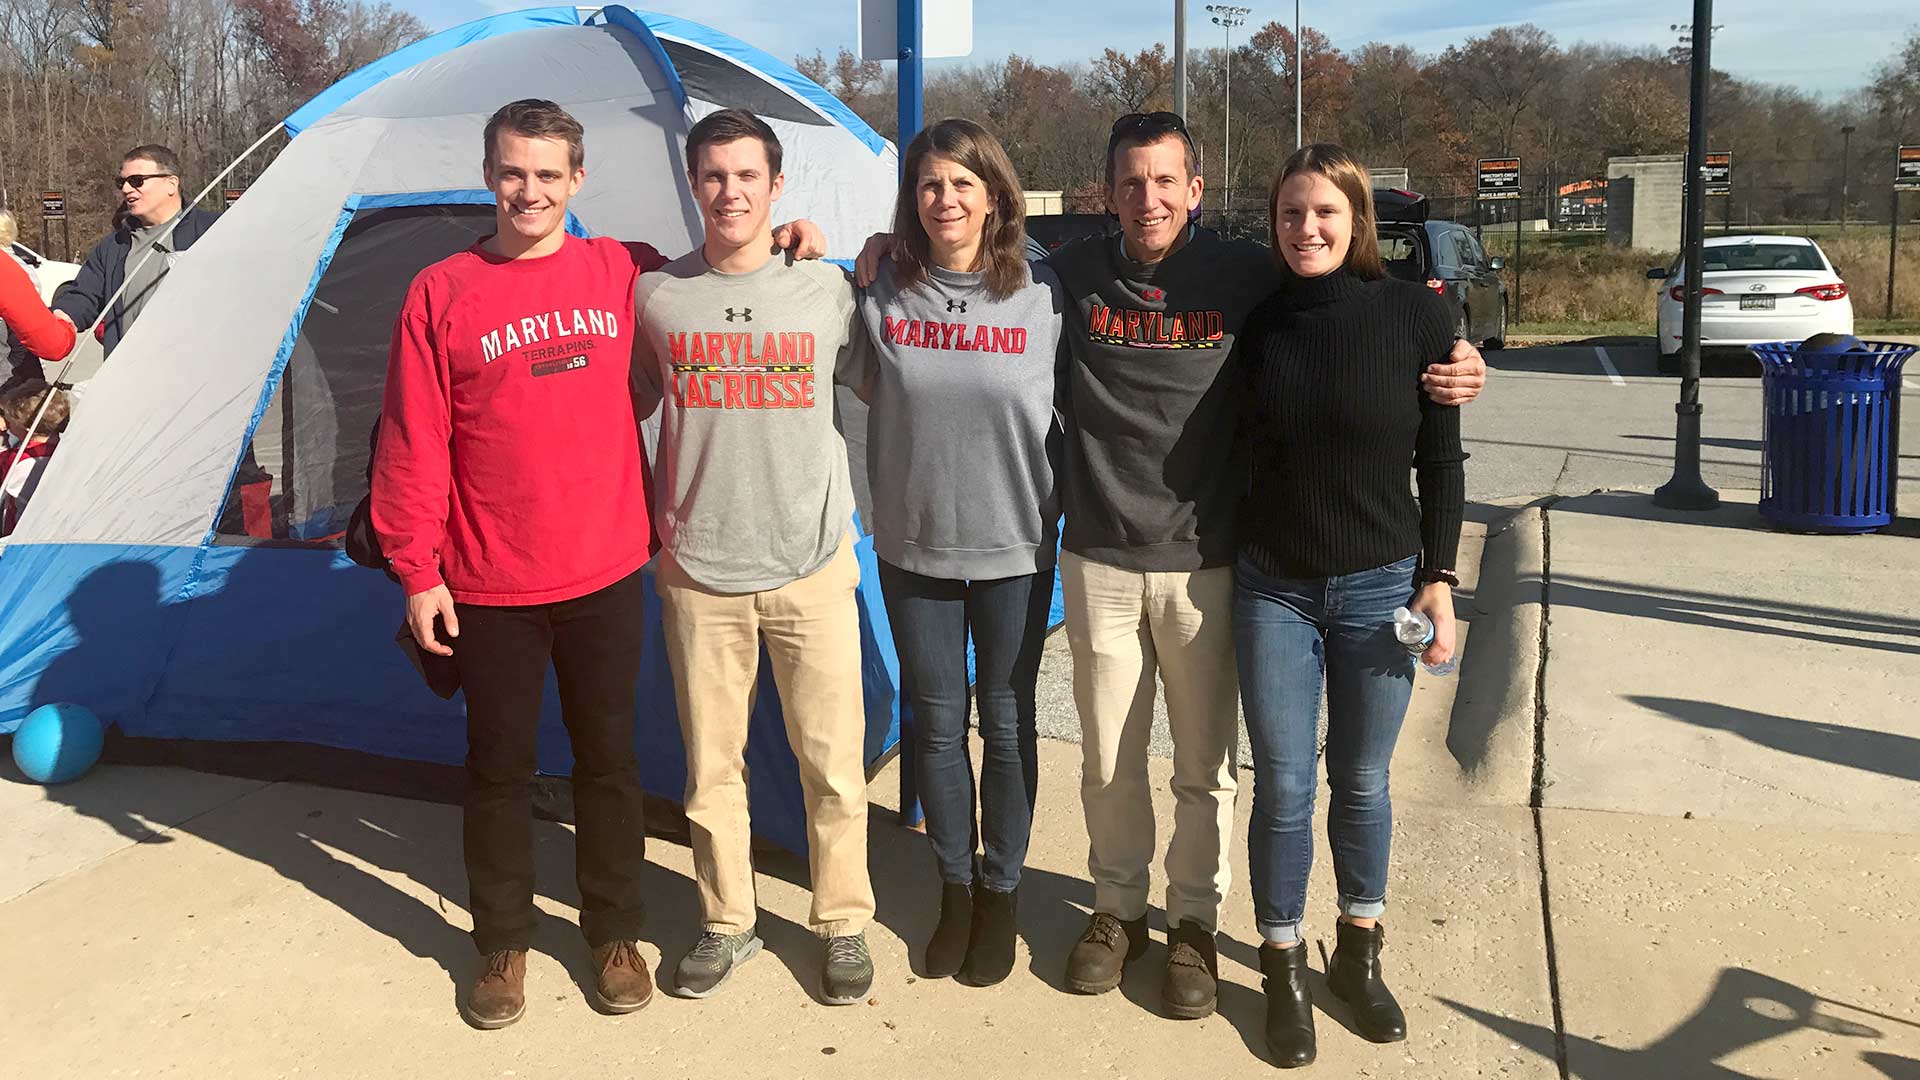 Dr. Kathleen Neuzil ’83 and family tailgating at UMD game